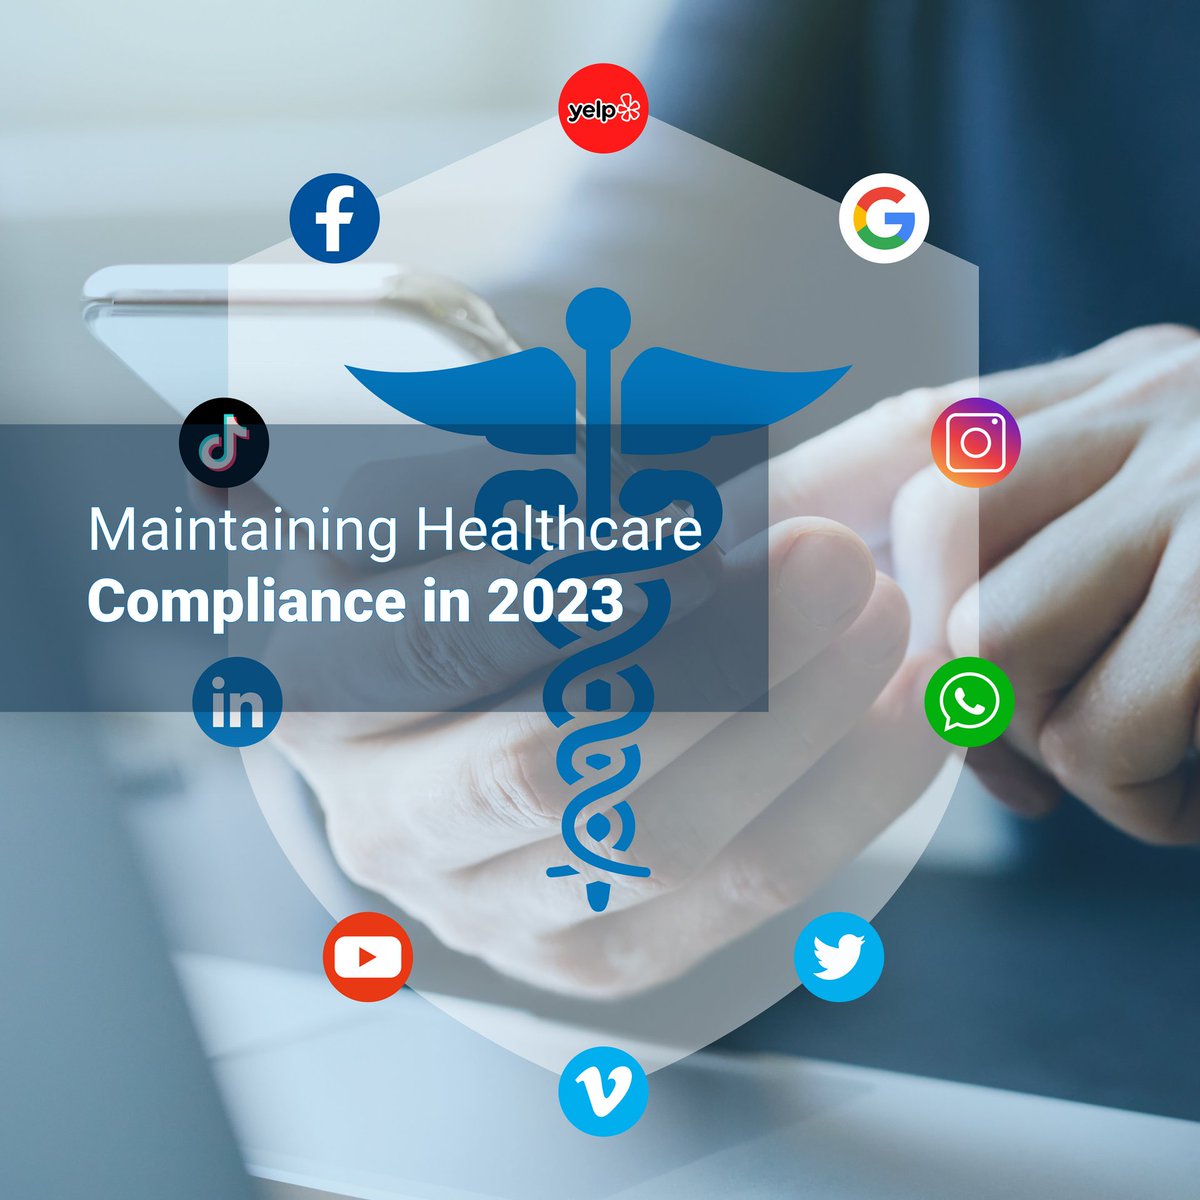 Our latest blog post, written by David Wornica, discusses a California dentist who was fined $23,000 for disclosing PHI on social media replies.

➡️Read more smarttraining.com/blog/maintaini…

#hipaa #hipaacompliance #dentalcompliance #socialmedia #PHI #healthcare #cybersecurity